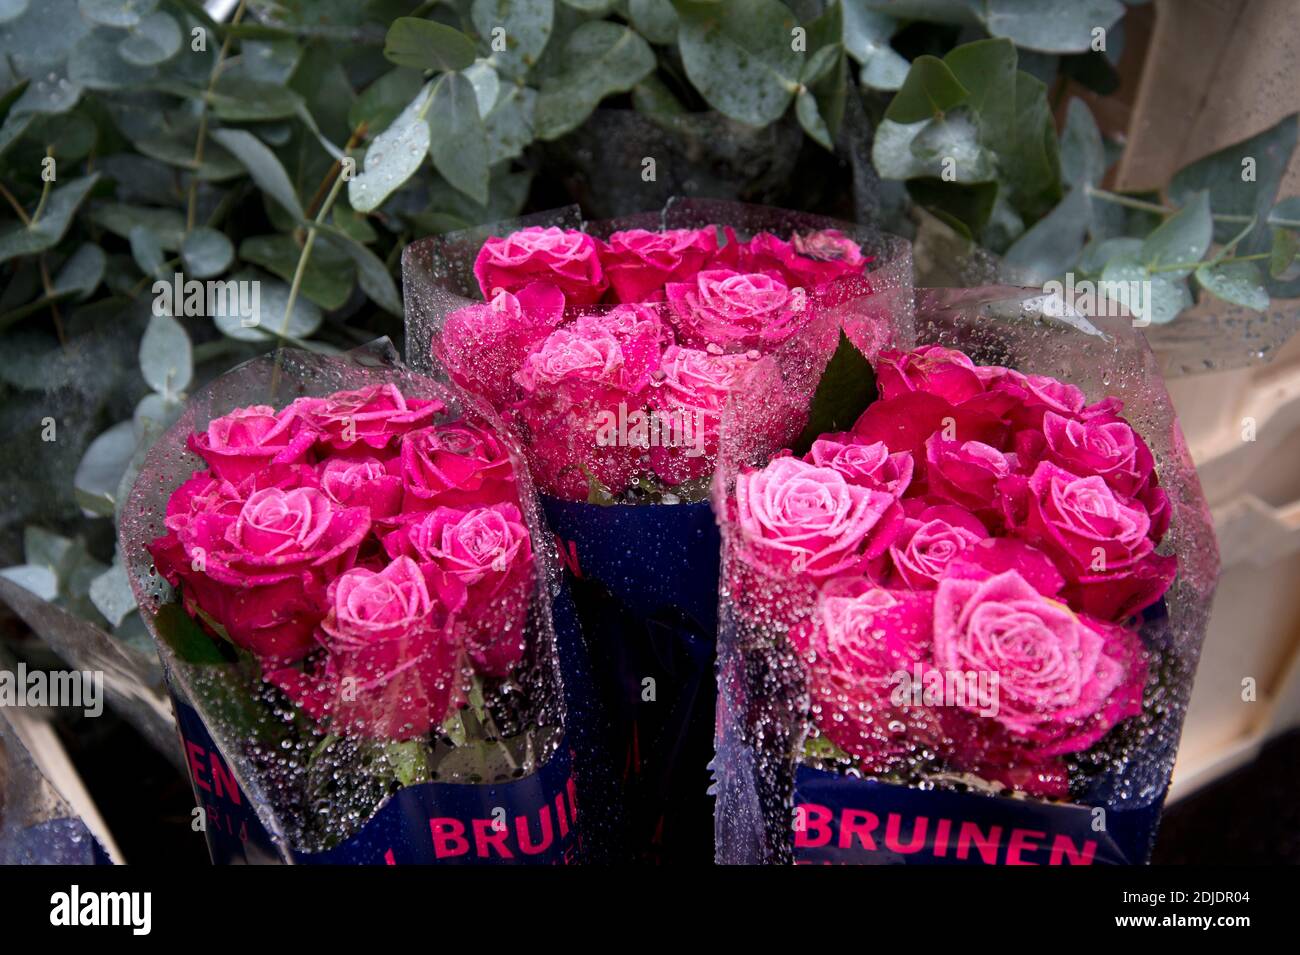 London December 2020. Columbia Road, Tower Hamlets. Sunday flower market. Dutch imported roses Stock Photo